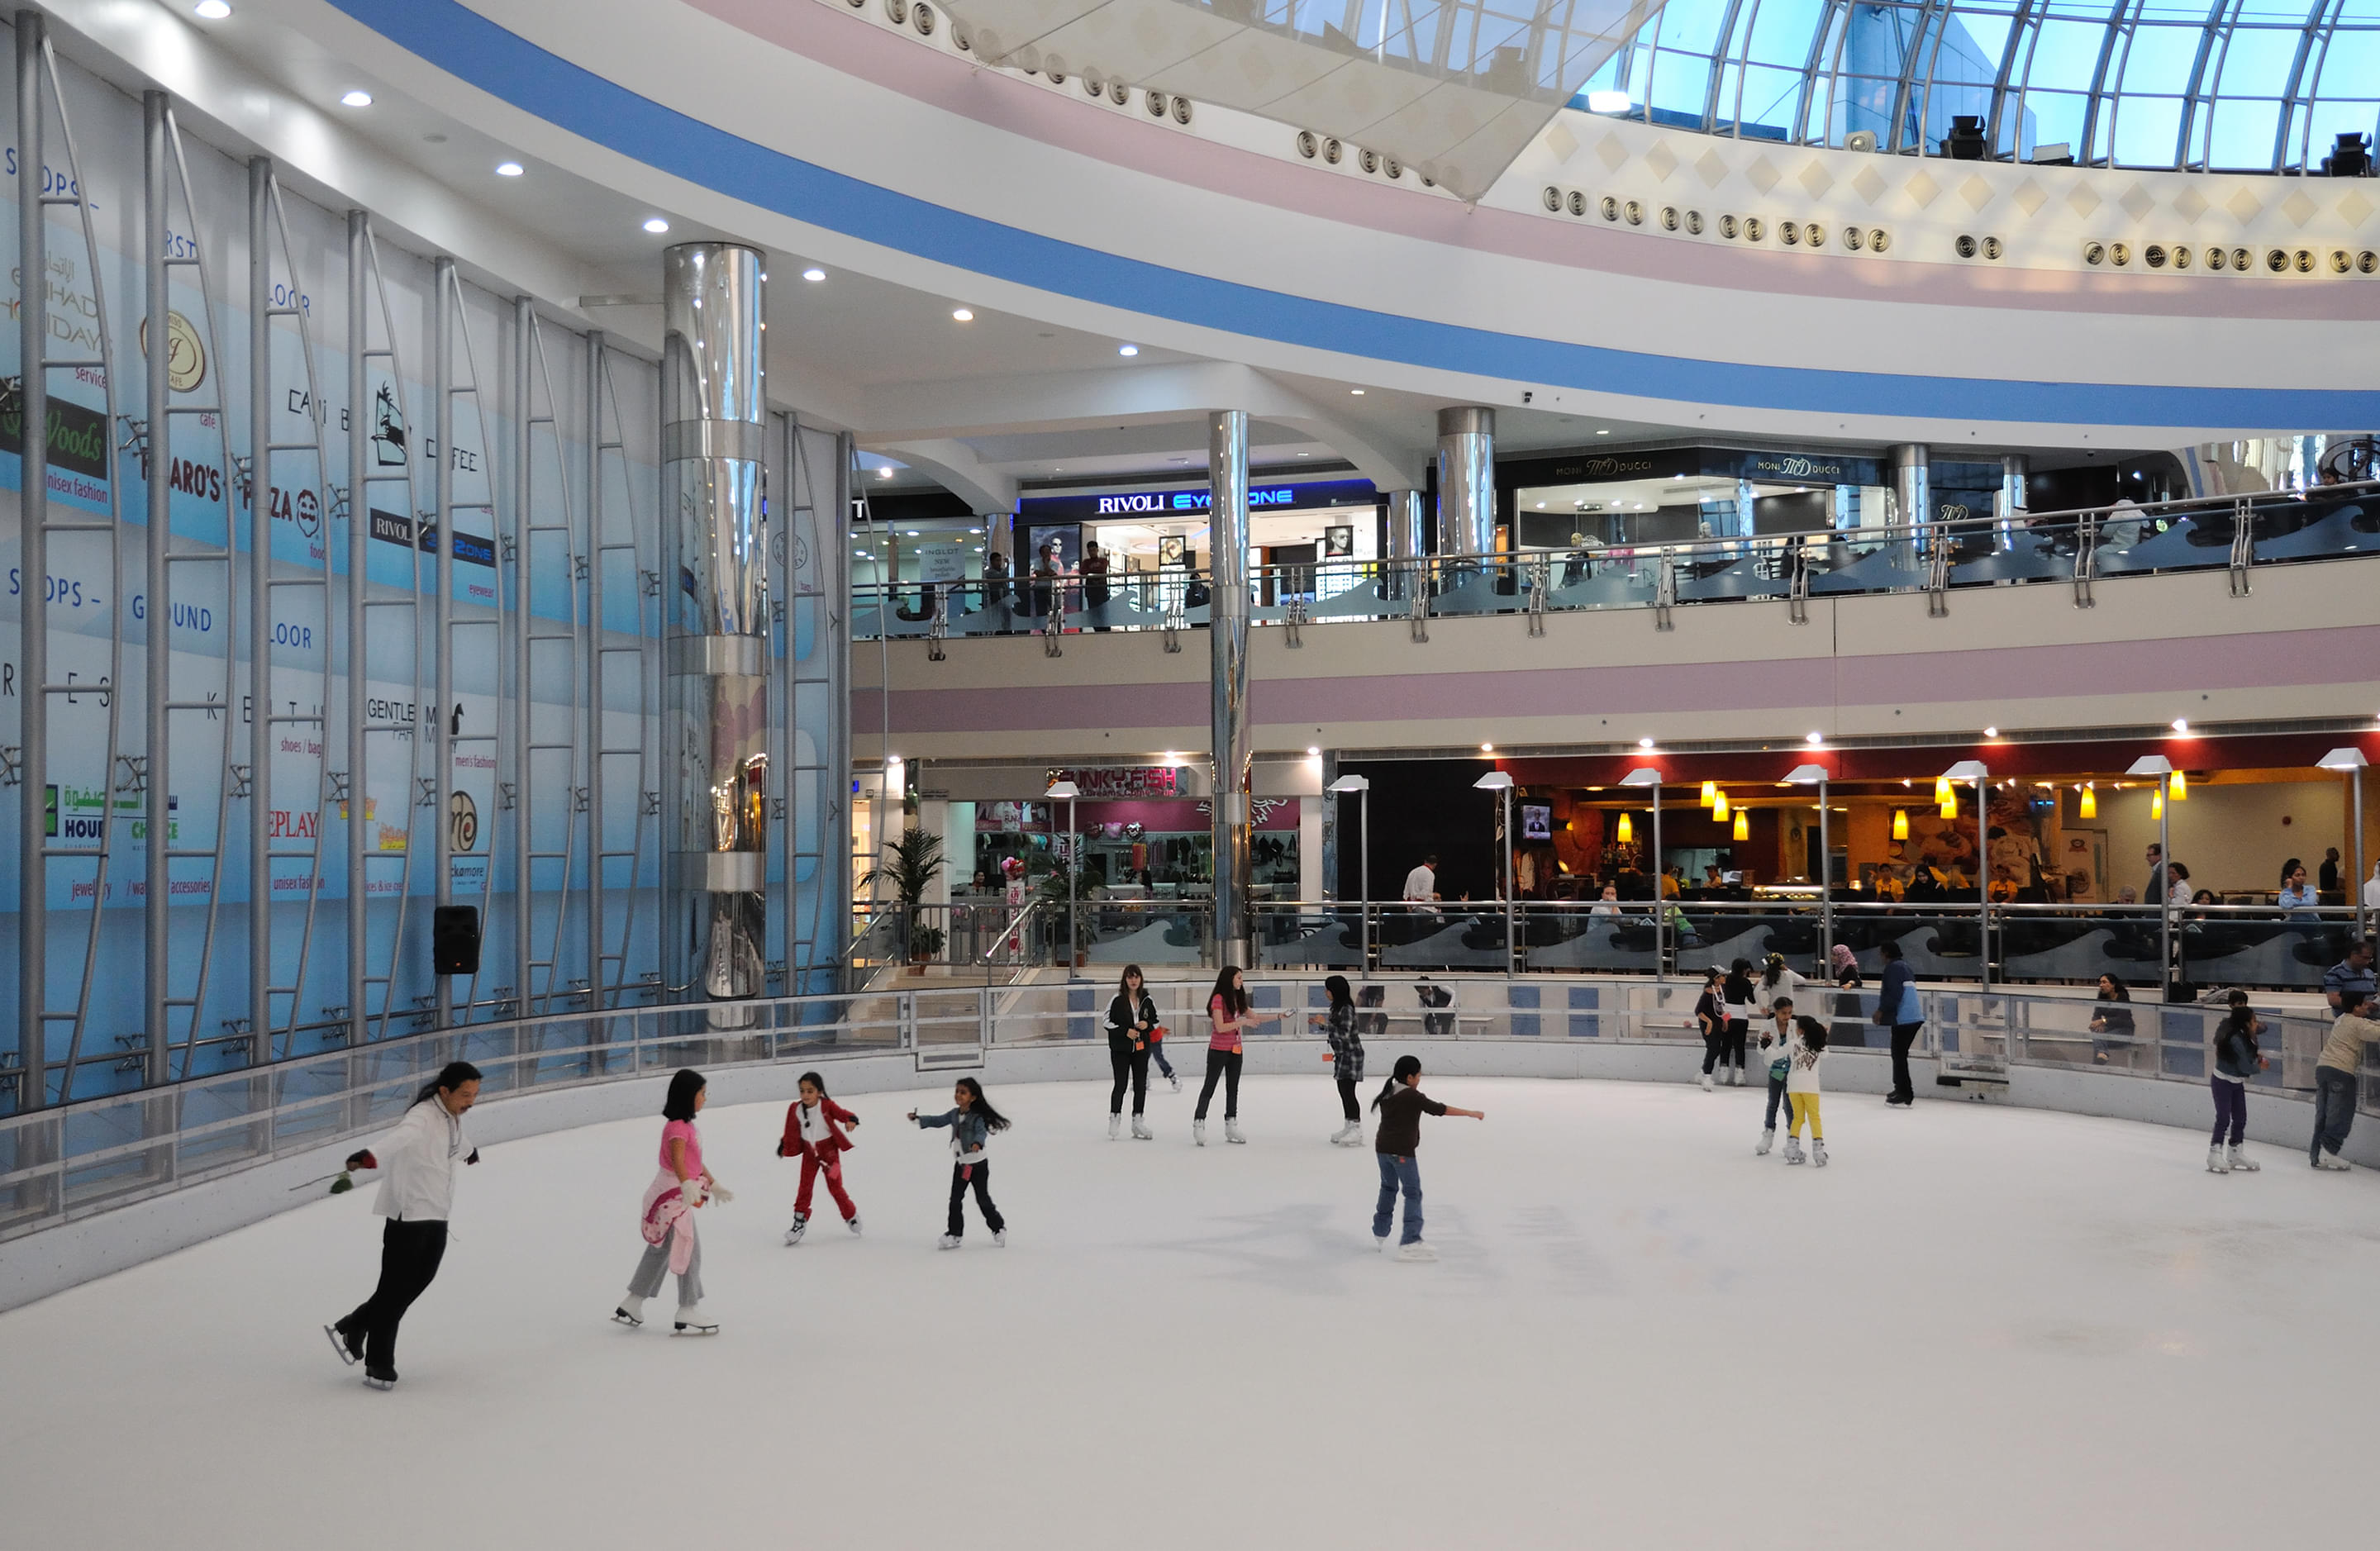 Ice Rink Abu Dhabi Overview